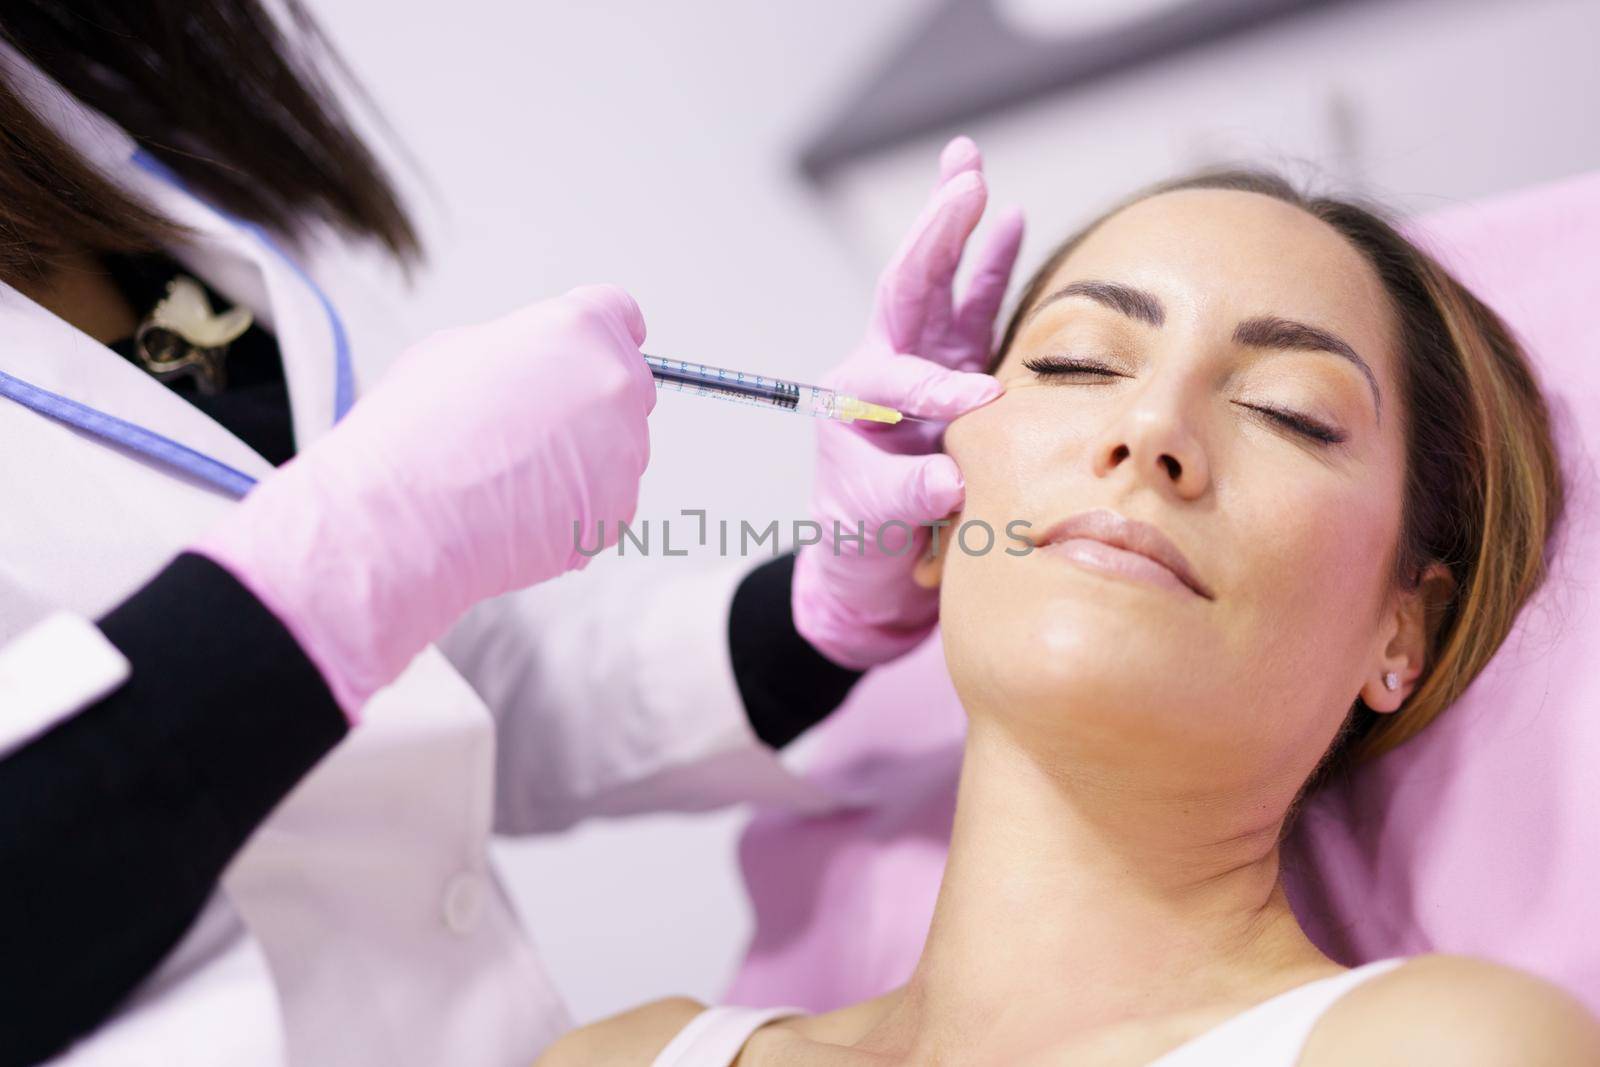 Doctor injecting hyaluronic acid into the cheekbones of a middle-aged woman as a facial rejuvenation treatment.